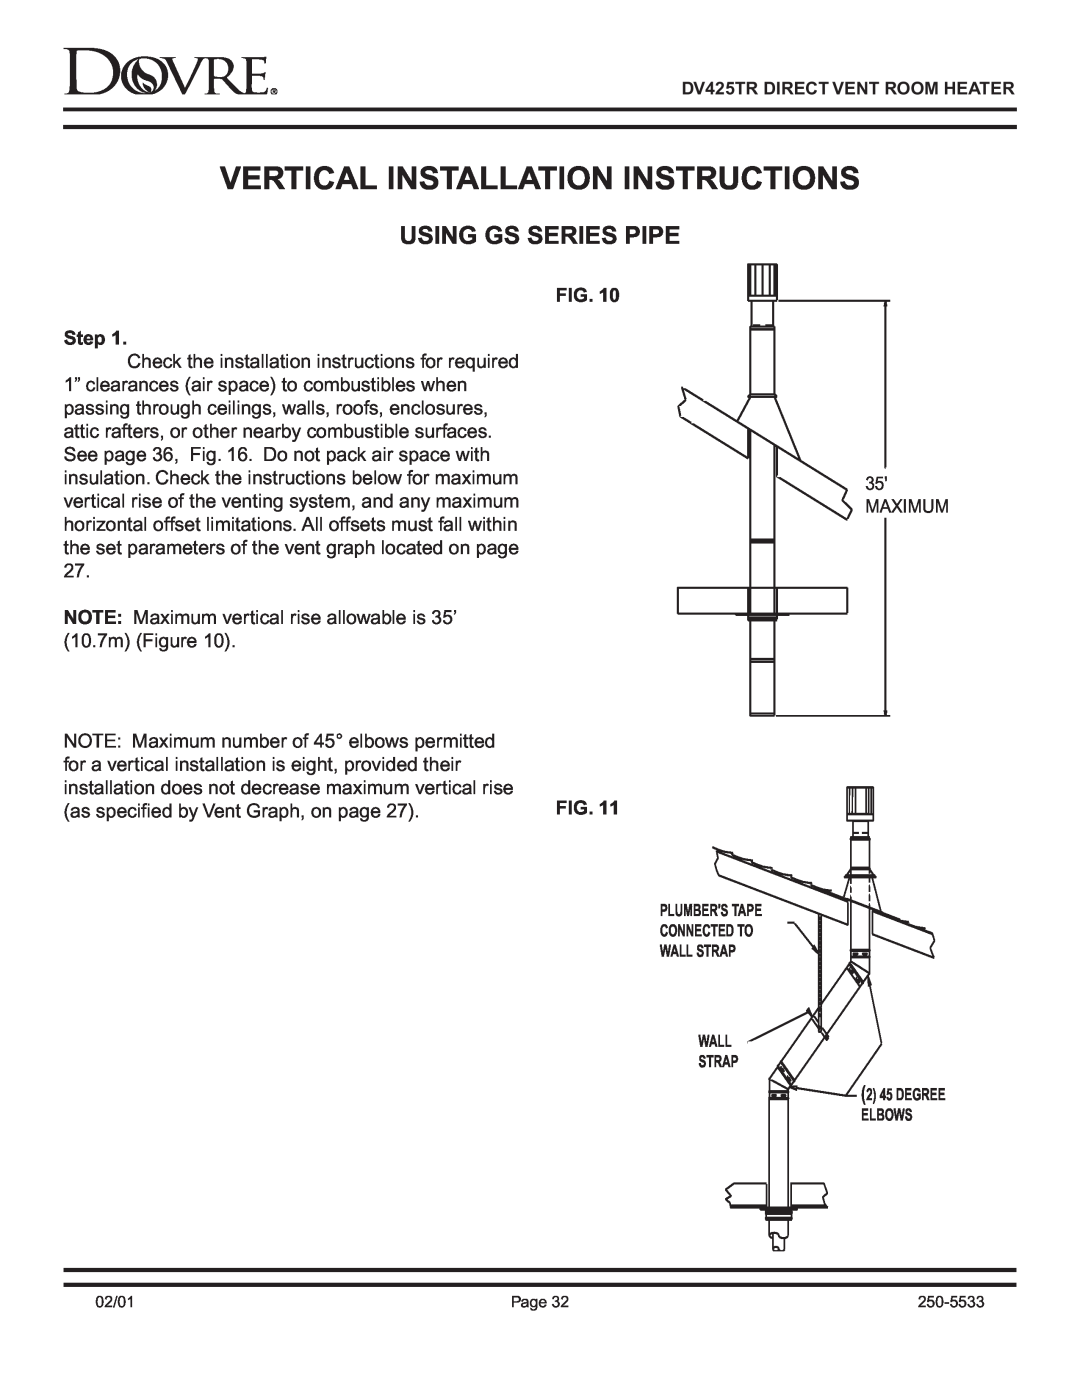 Sapphire Audio DV425TR owner manual Vertical Installation Instructions, Using Gs Series Pipe, FIG. Step 